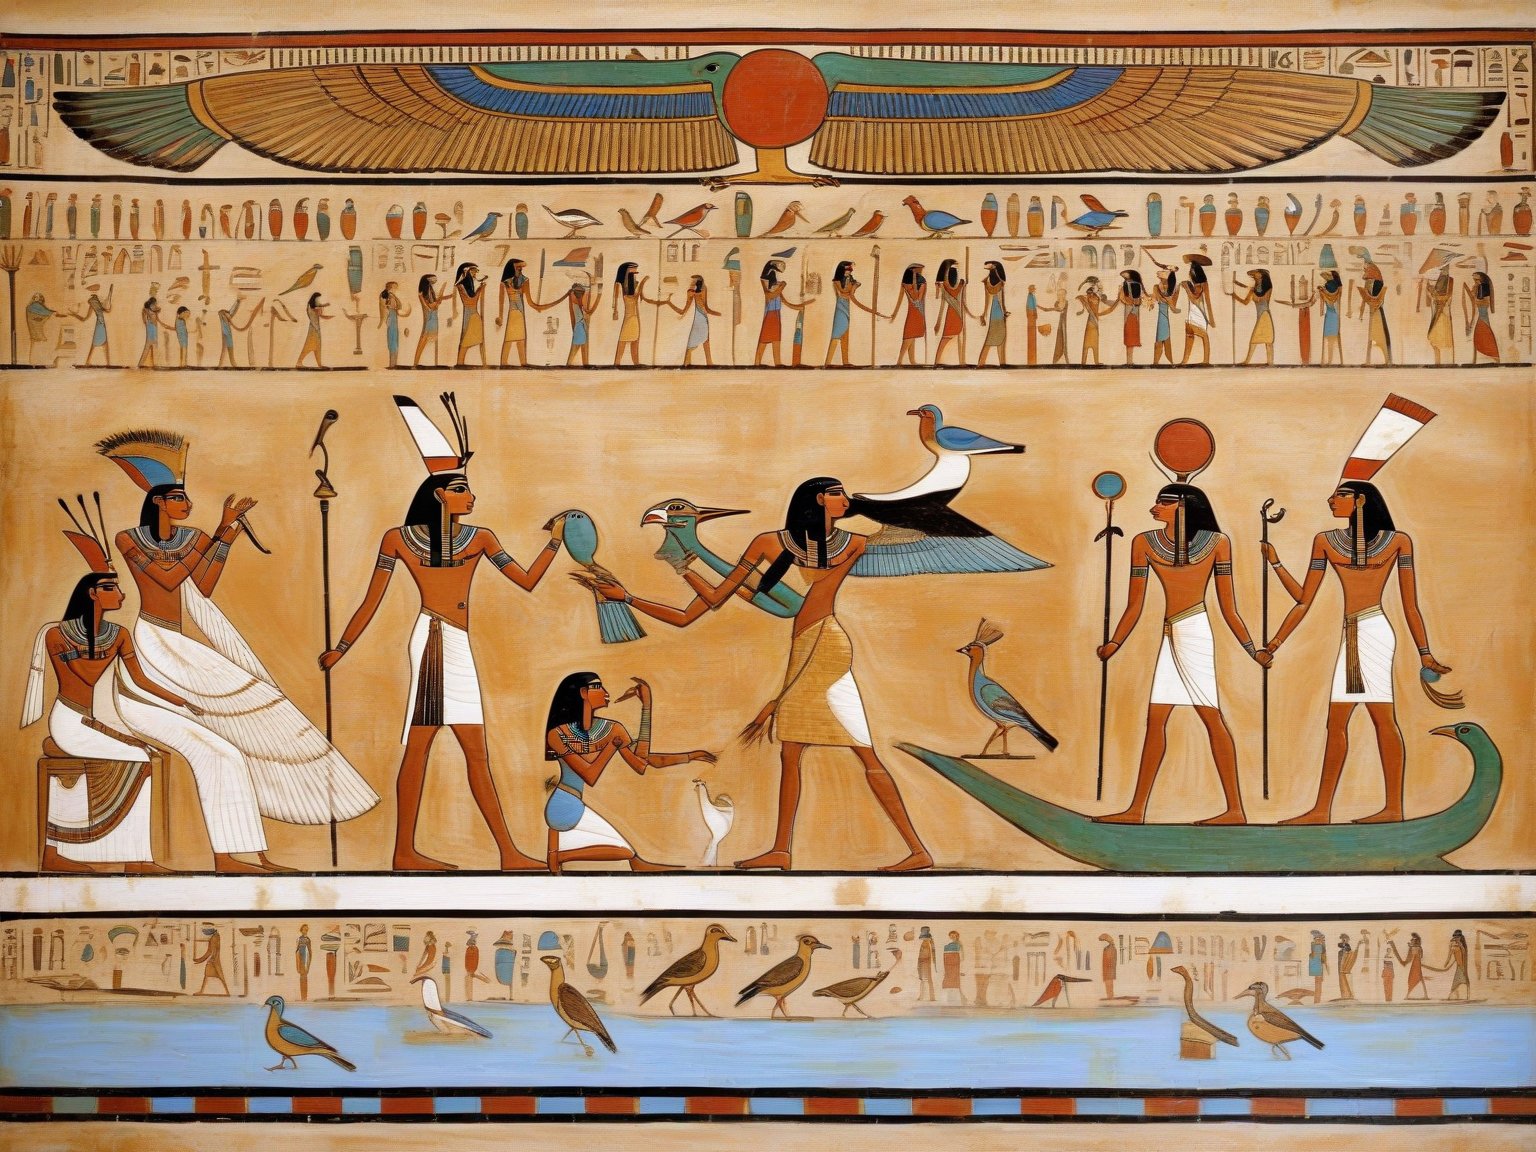 egyptian painting of a group of people with a bird, ancient egypt painting, ancient egypt art, egyptian art, ancient egyptian art, egyptian iconography, egyptian gods, egyptian symbolism, ancient egyptian mural, egyptian mythology, ancient egyptian, egyptian style, kemetic symbolism, egyptian setting, egyptian clothing, ancient egypt, egypt themed art, egyptian, hieroglyphic occult